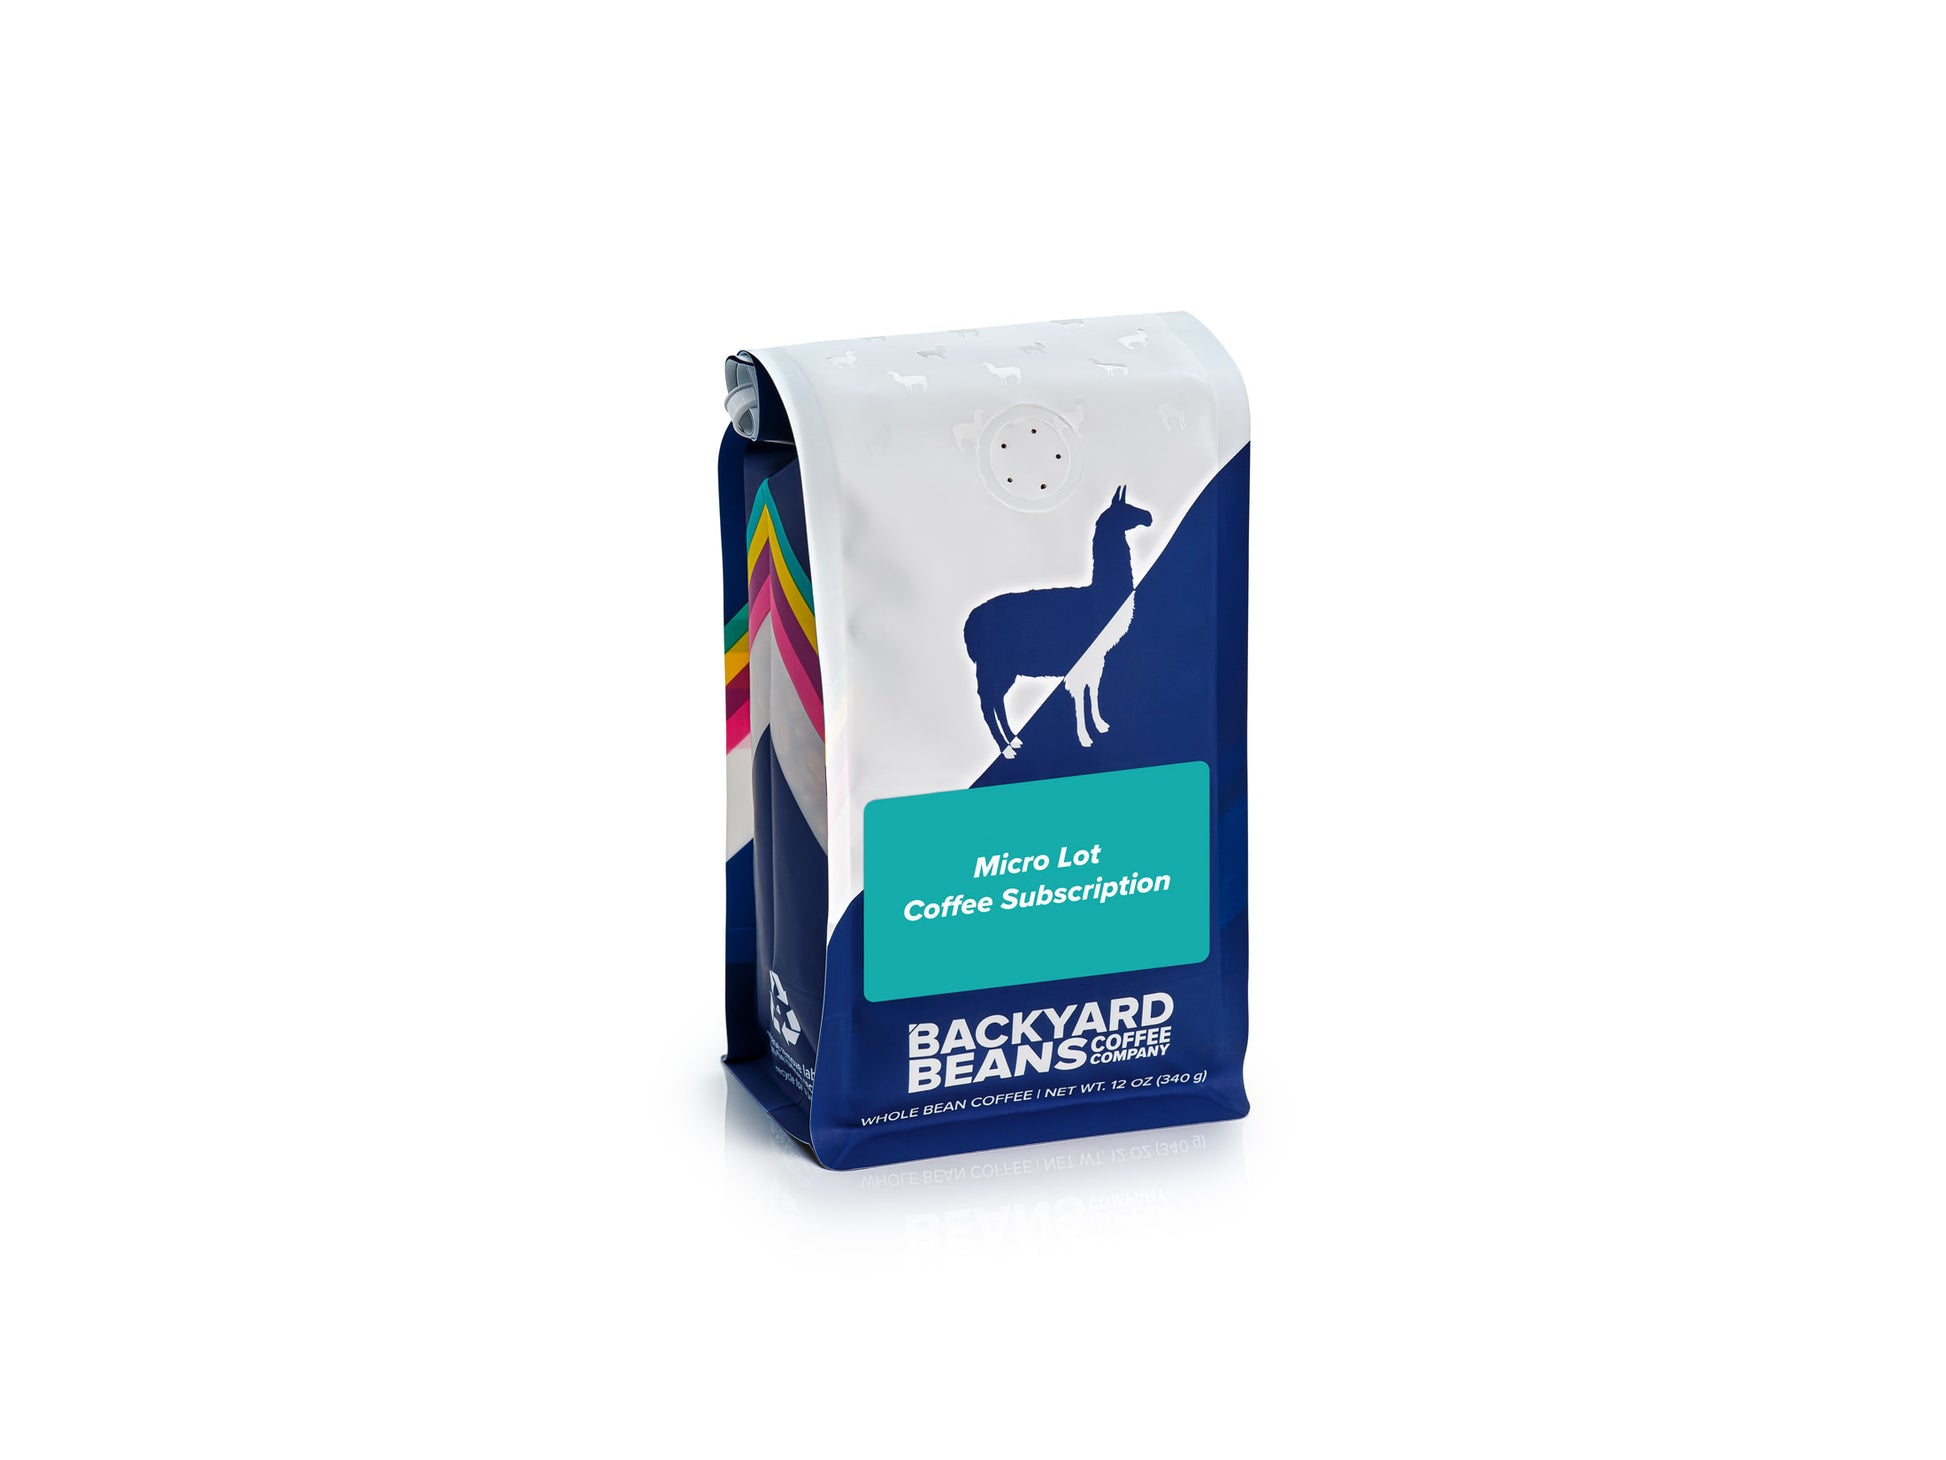 Image of Teal Label Coffee Subscription coffee bag.